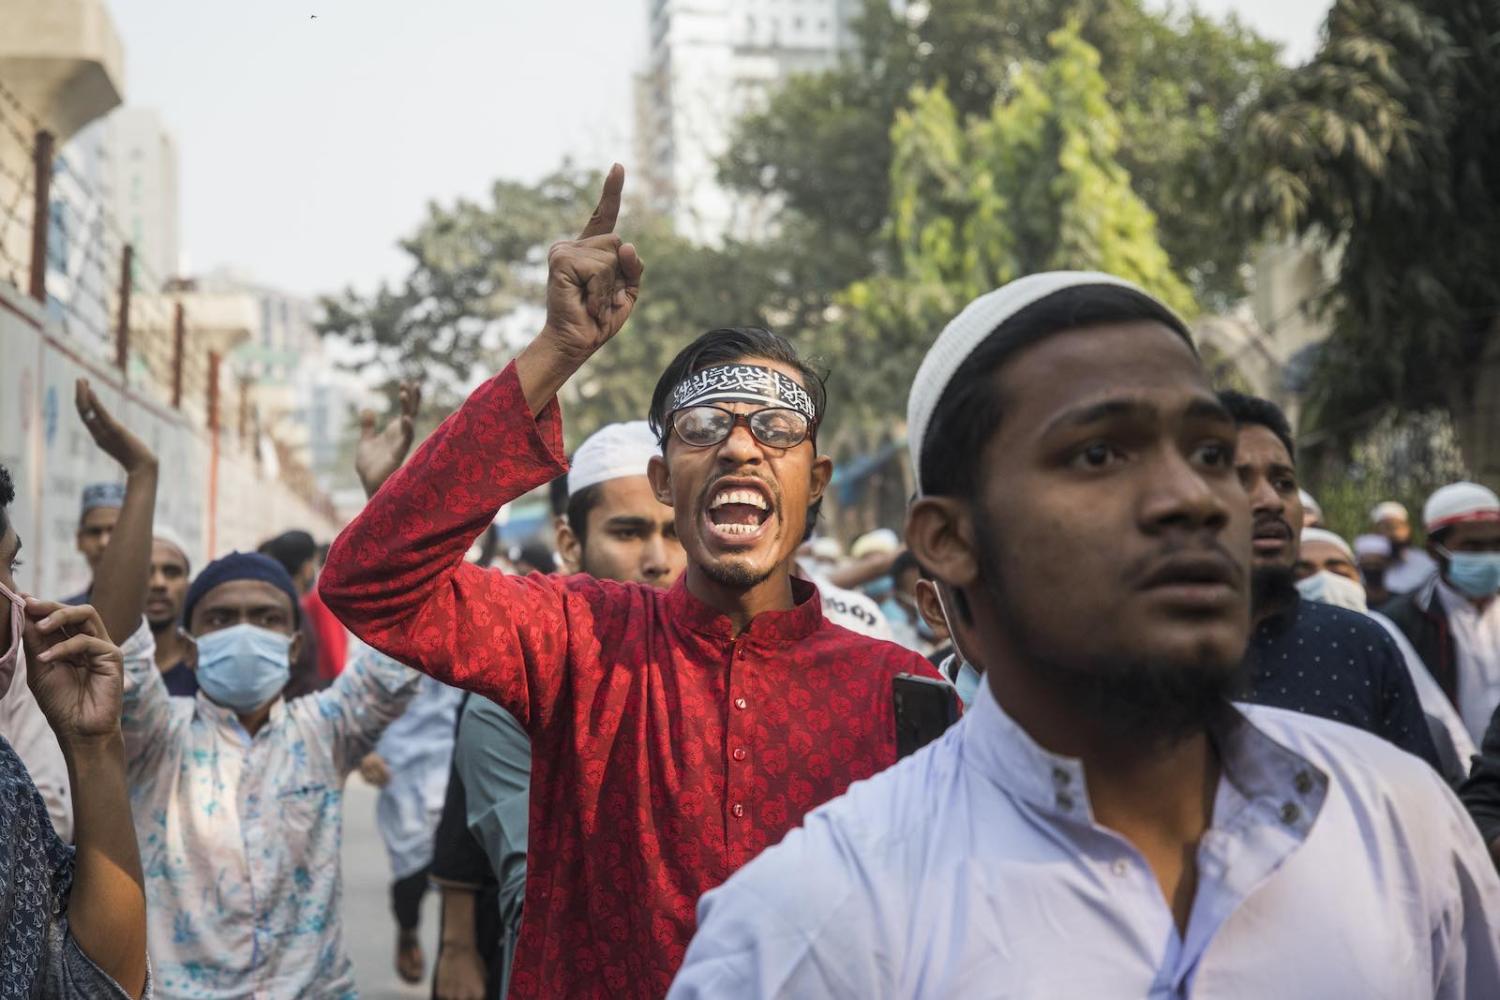 Protesting the installation of statues of Bangladesh’s founding president, 4 December 2020 in Dhaka (Ahmed Salahuddin/NurPhoto via Getty Images)